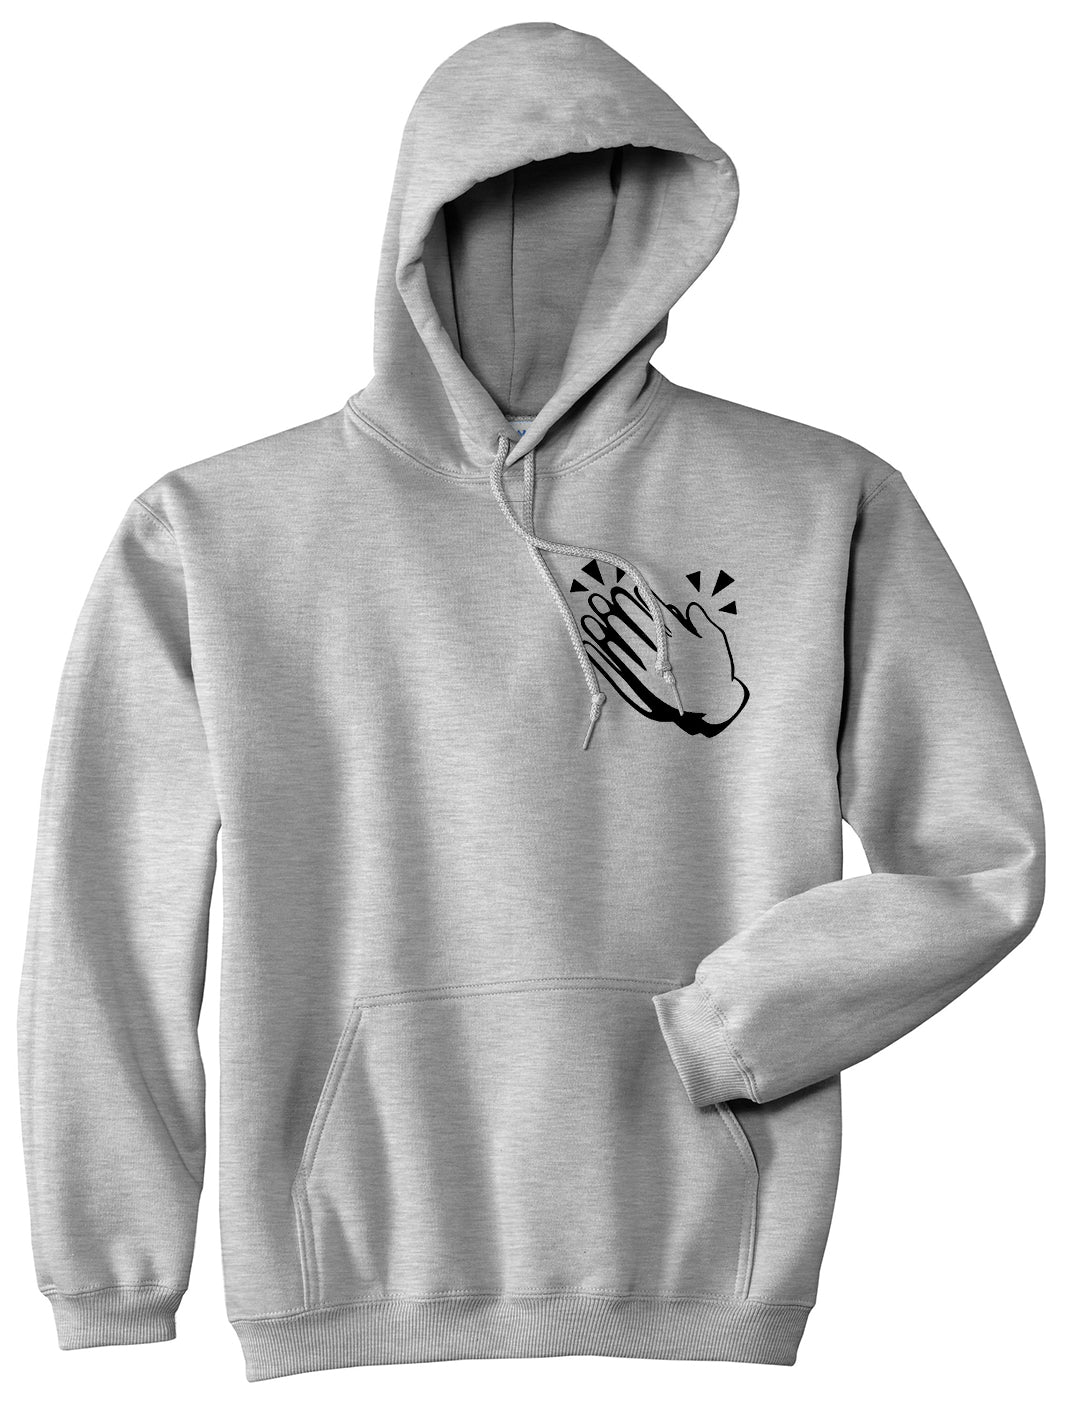 Clapping Hands Emoji Chest Mens Grey Pullover Hoodie by Kings Of NY